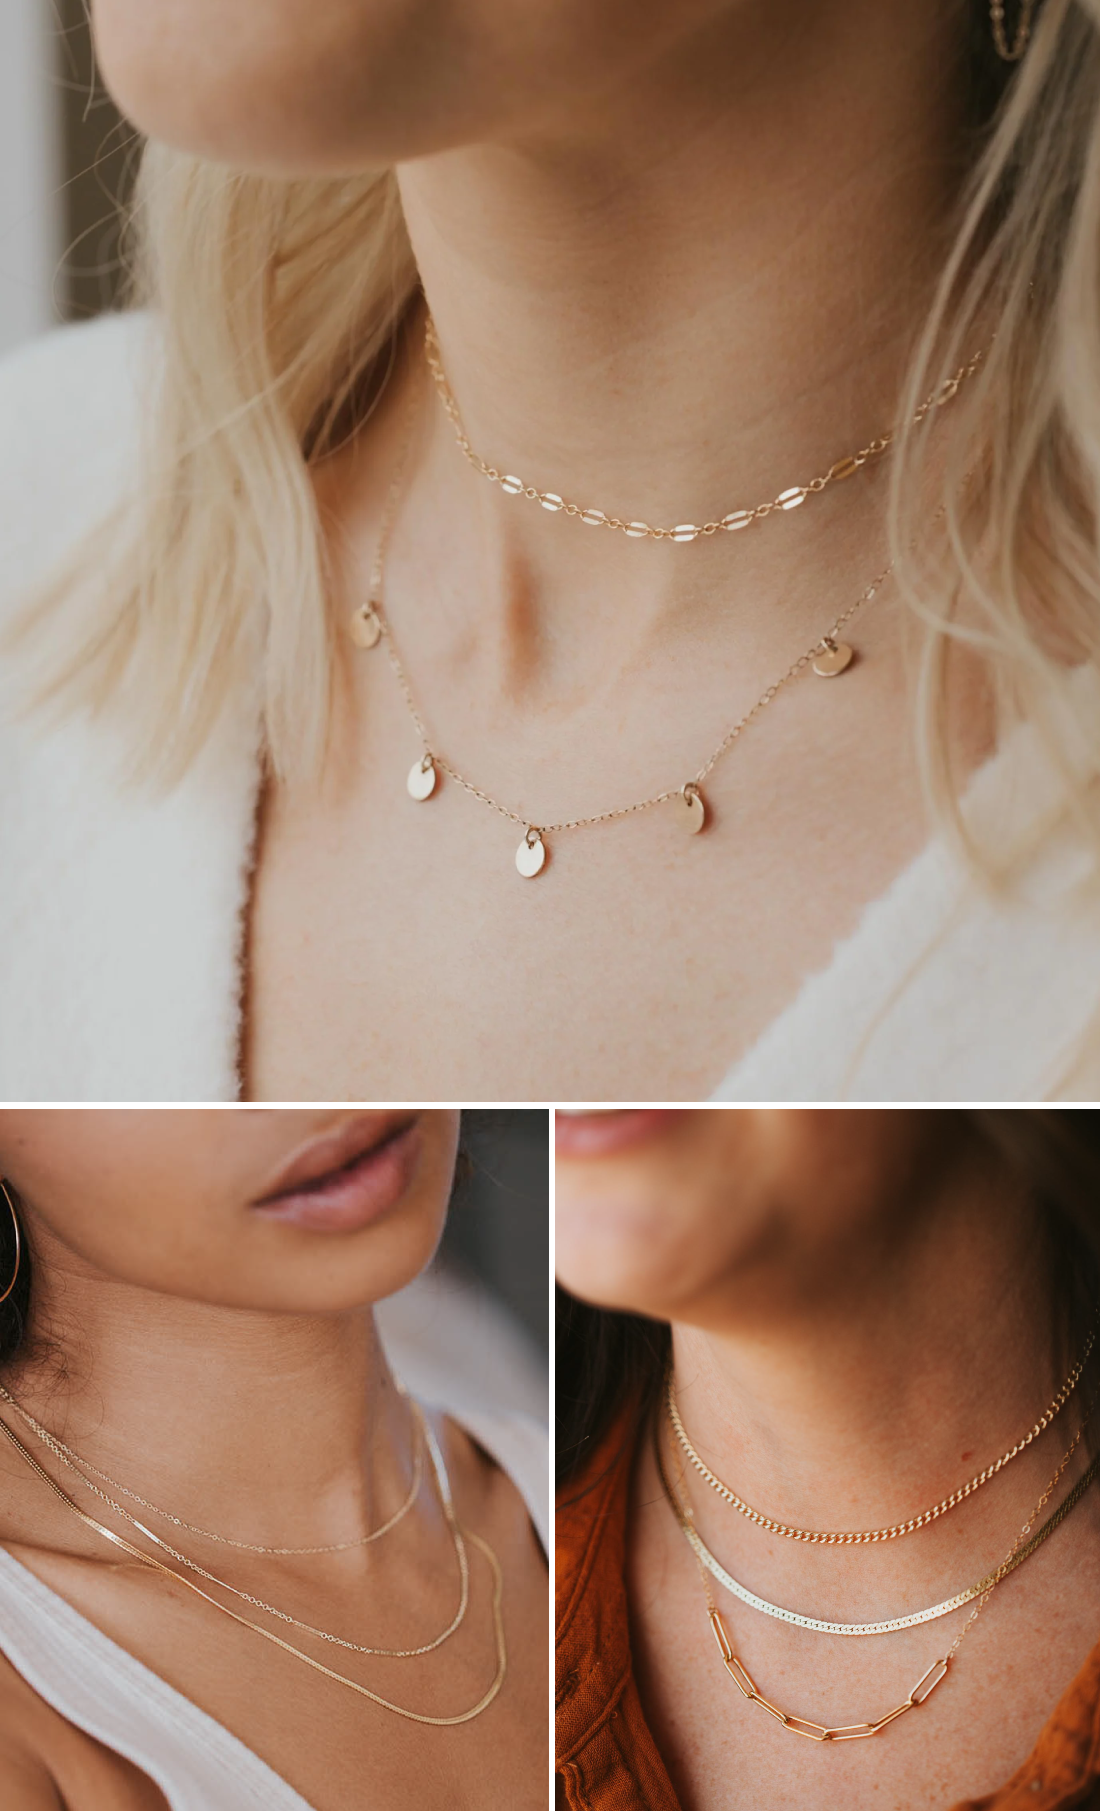 How to layer chains and necklaces